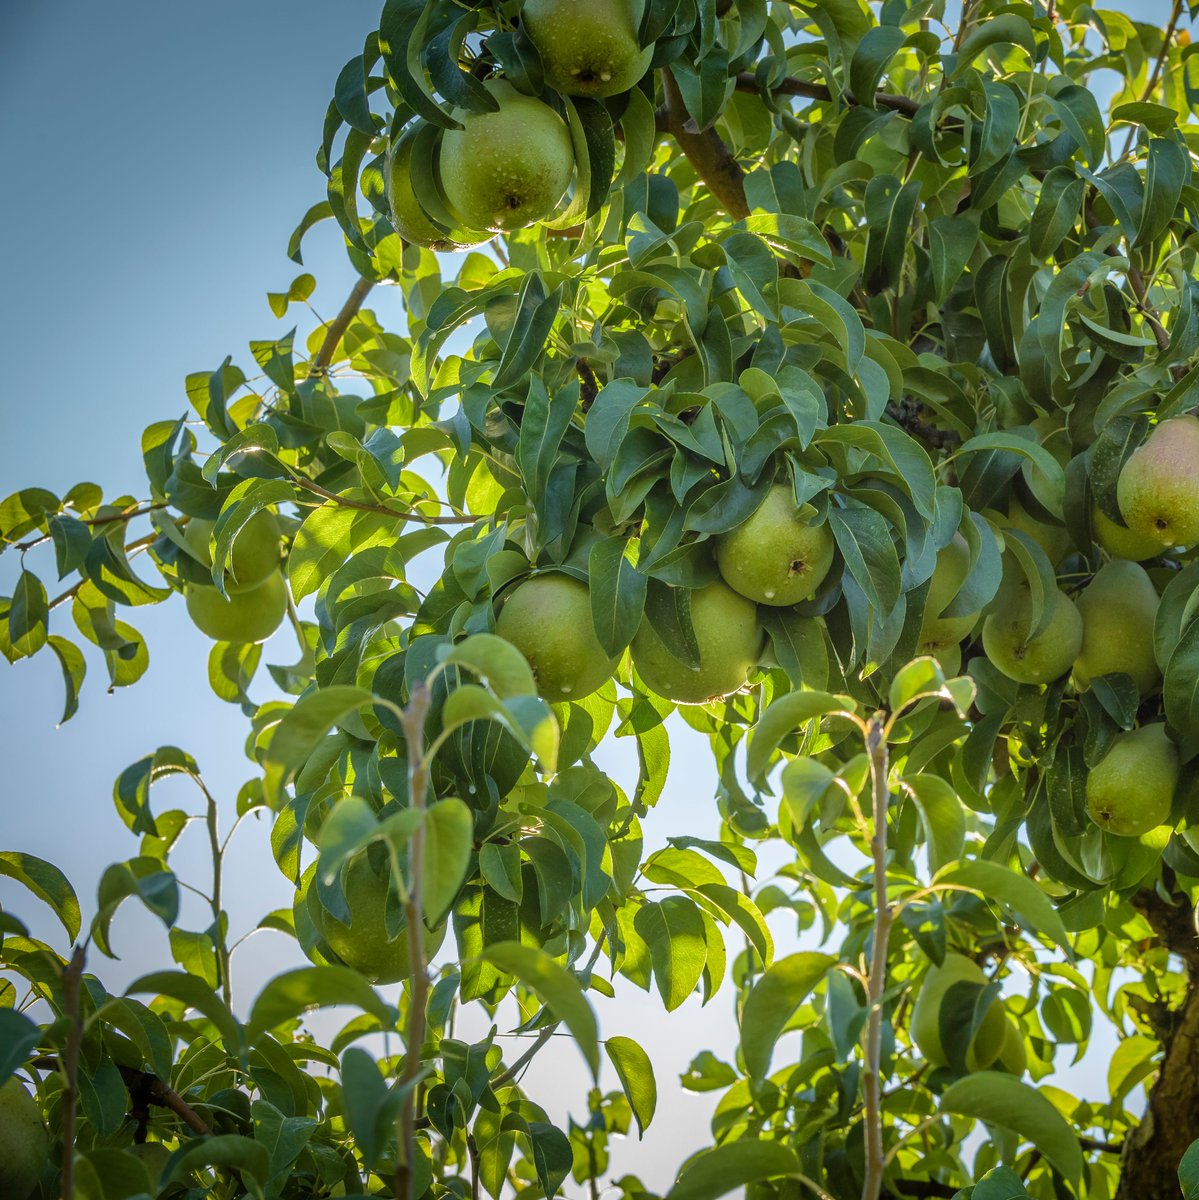 Pear season is coming! What variety are you most excited to snack on?! #WashingtonGrown #ChelanFresh #Pears #PearHarvest